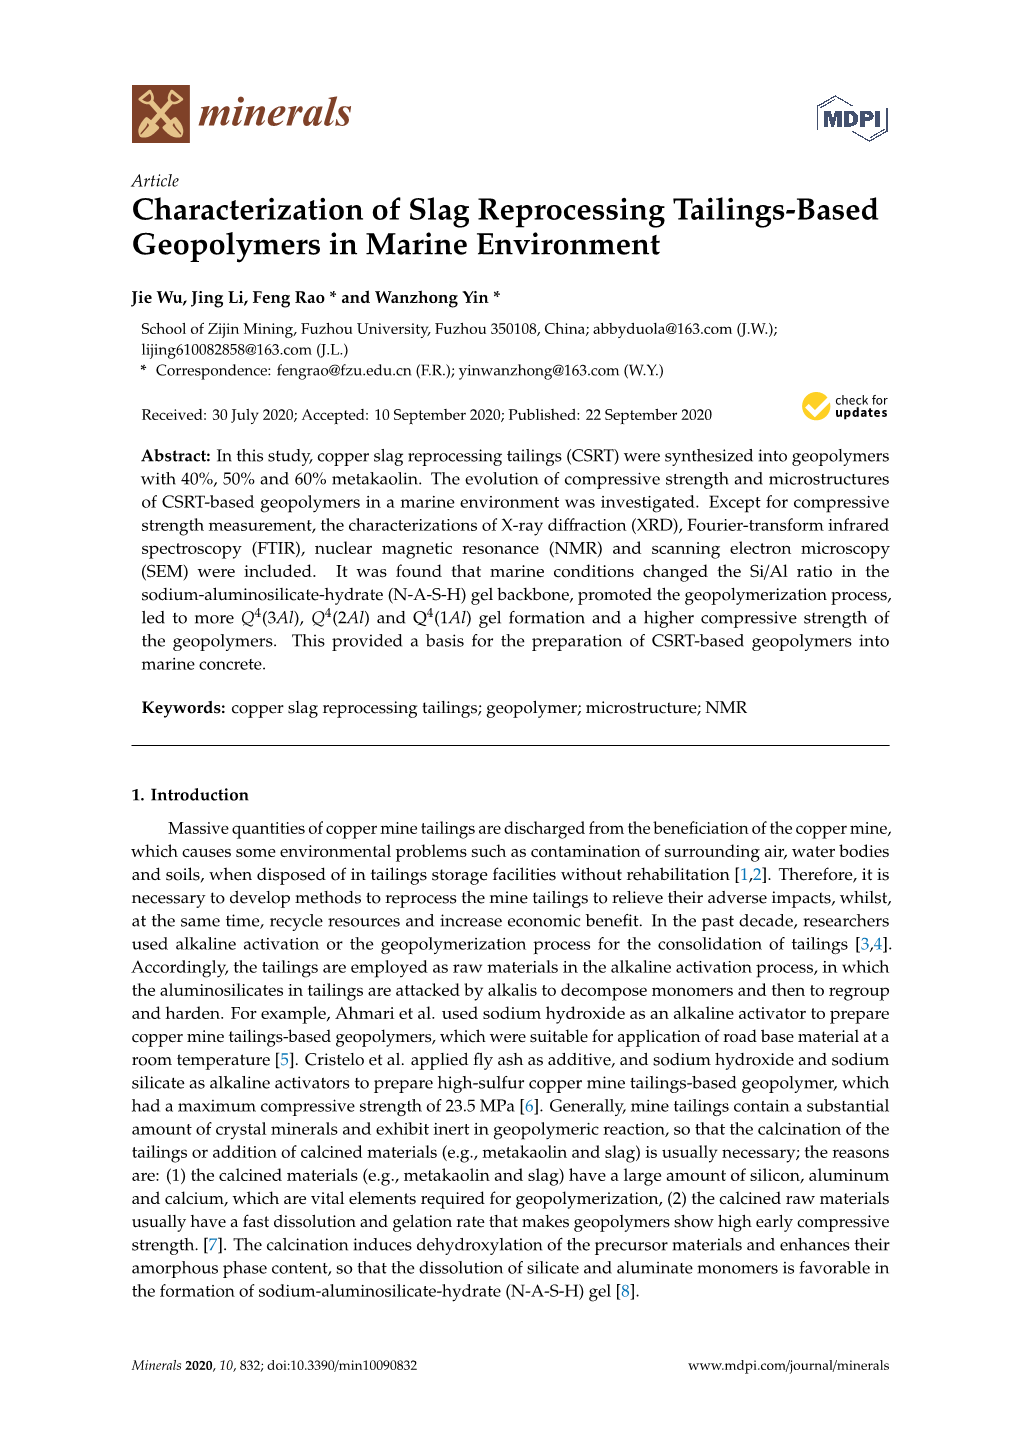 Characterization of Slag Reprocessing Tailings-Based Geopolymers in Marine Environment